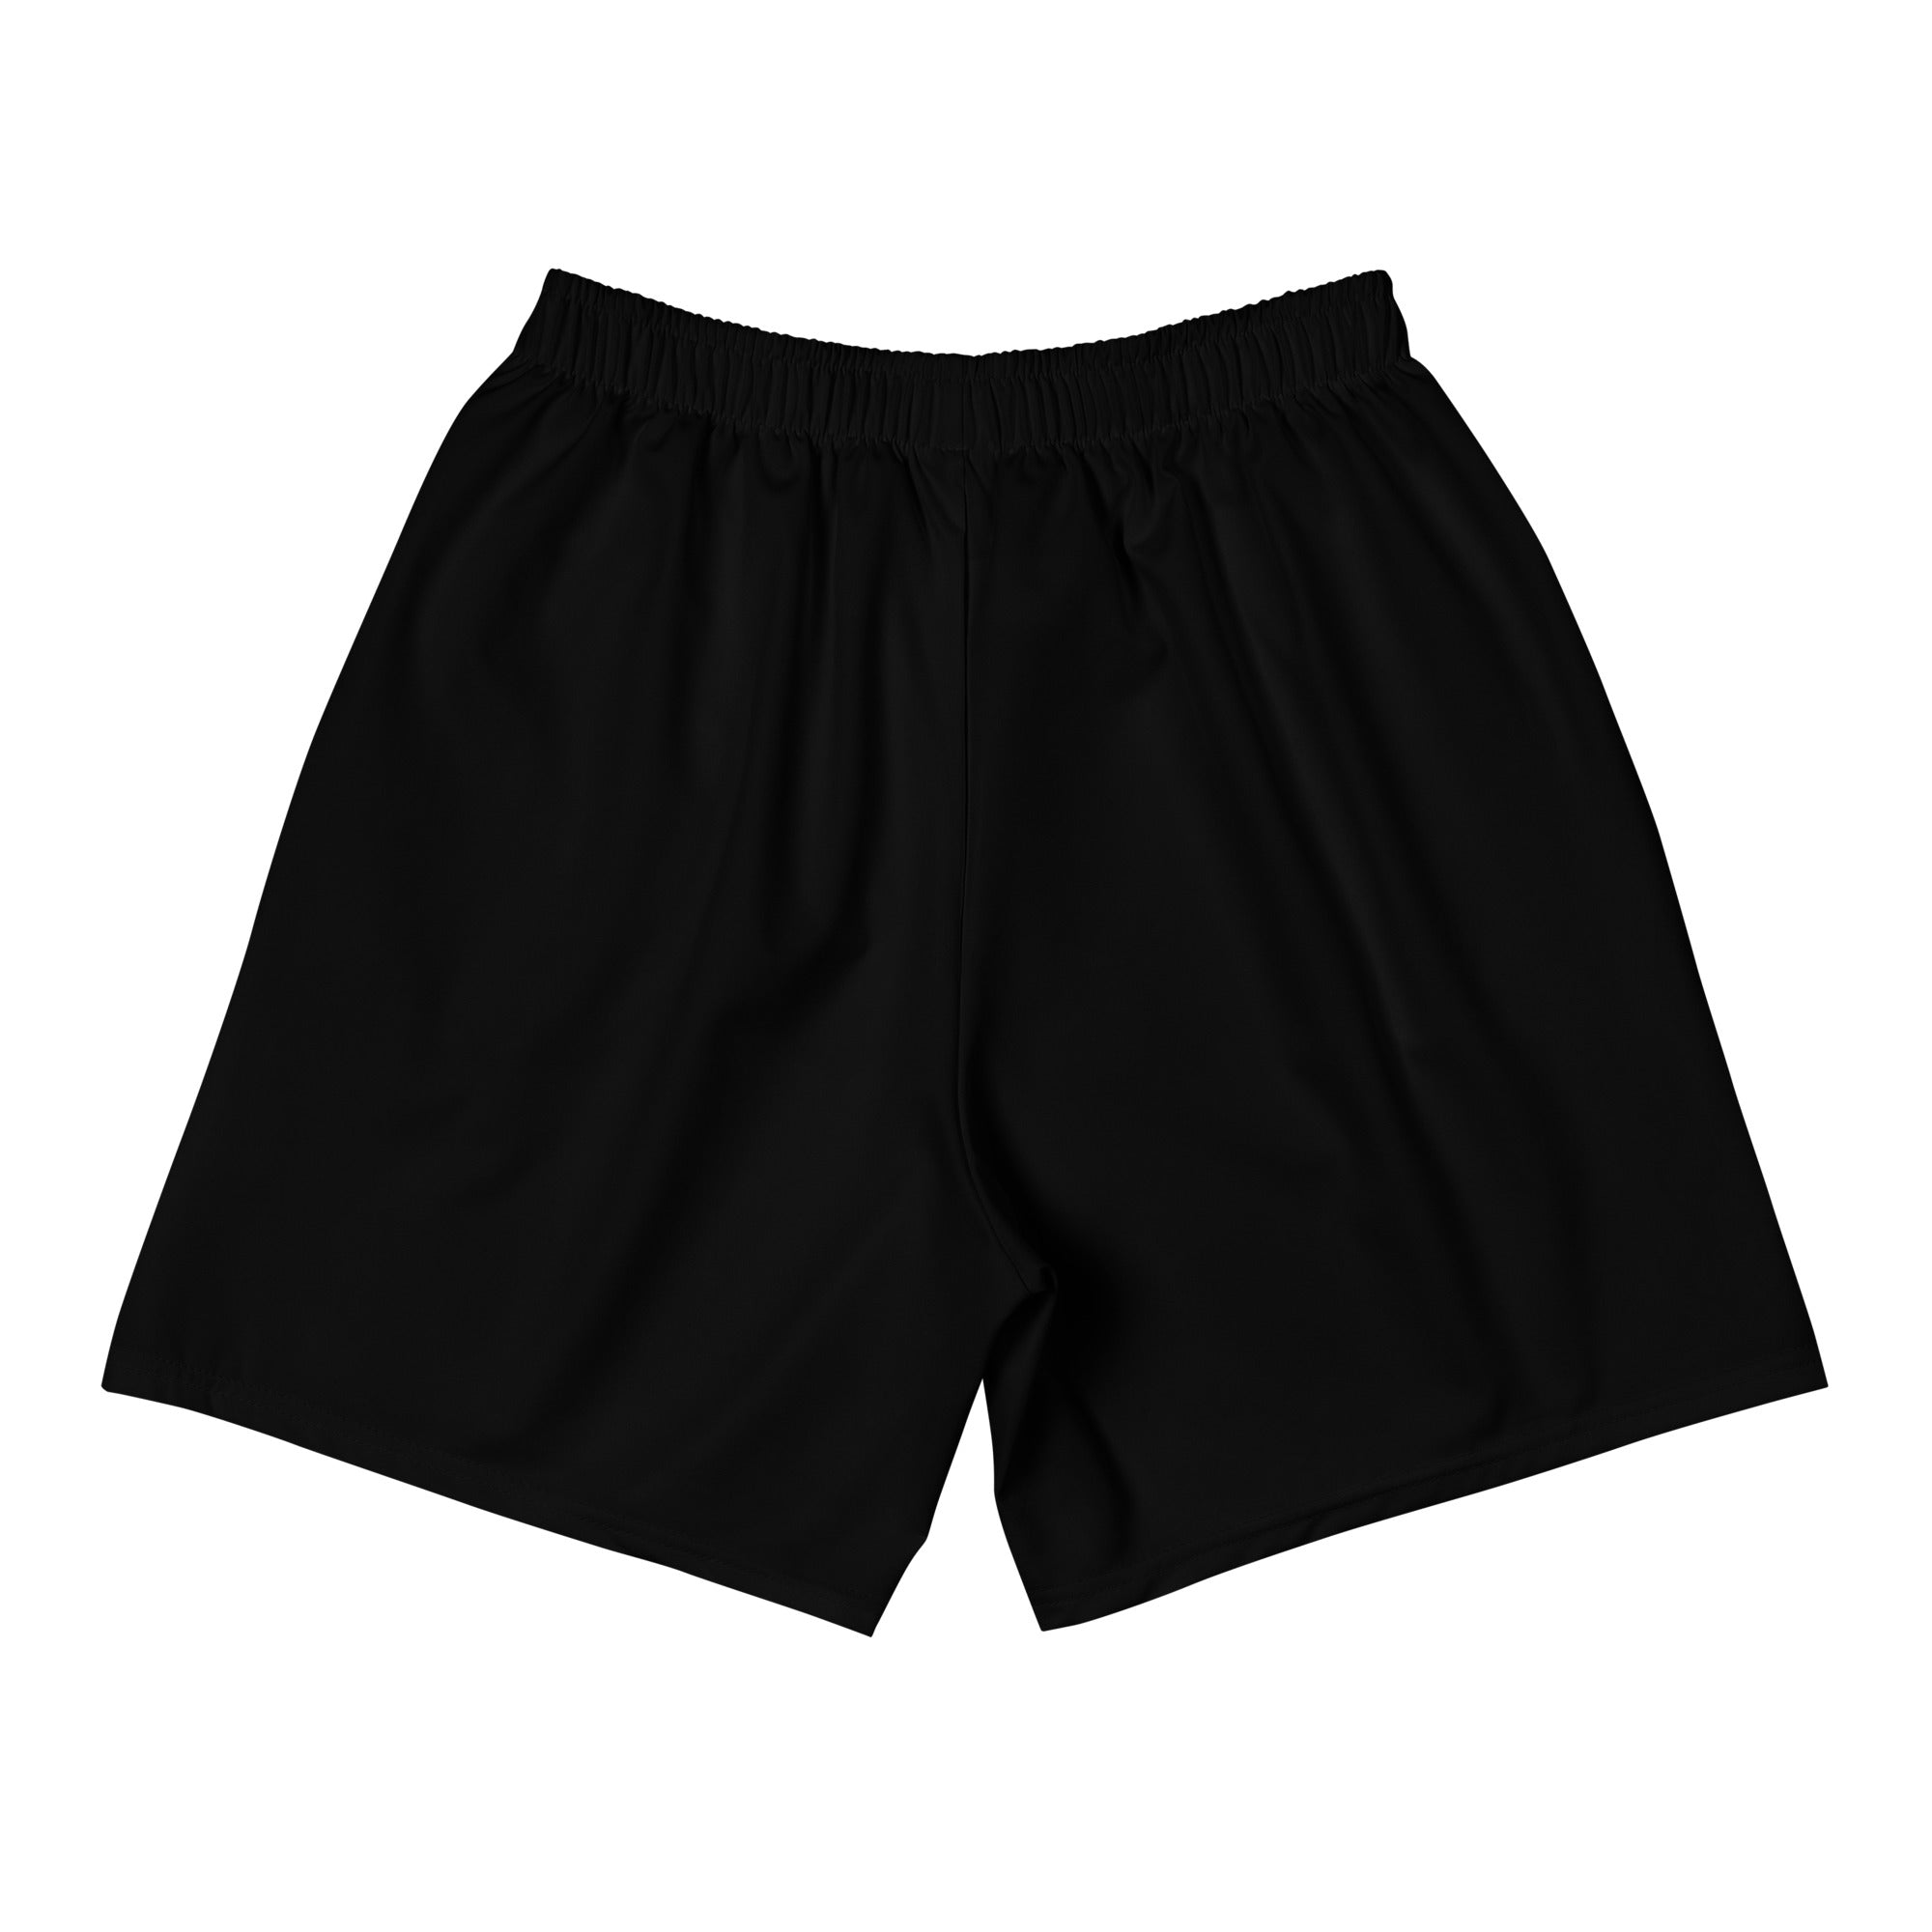 Montville Men's Recycled Athletic Shorts